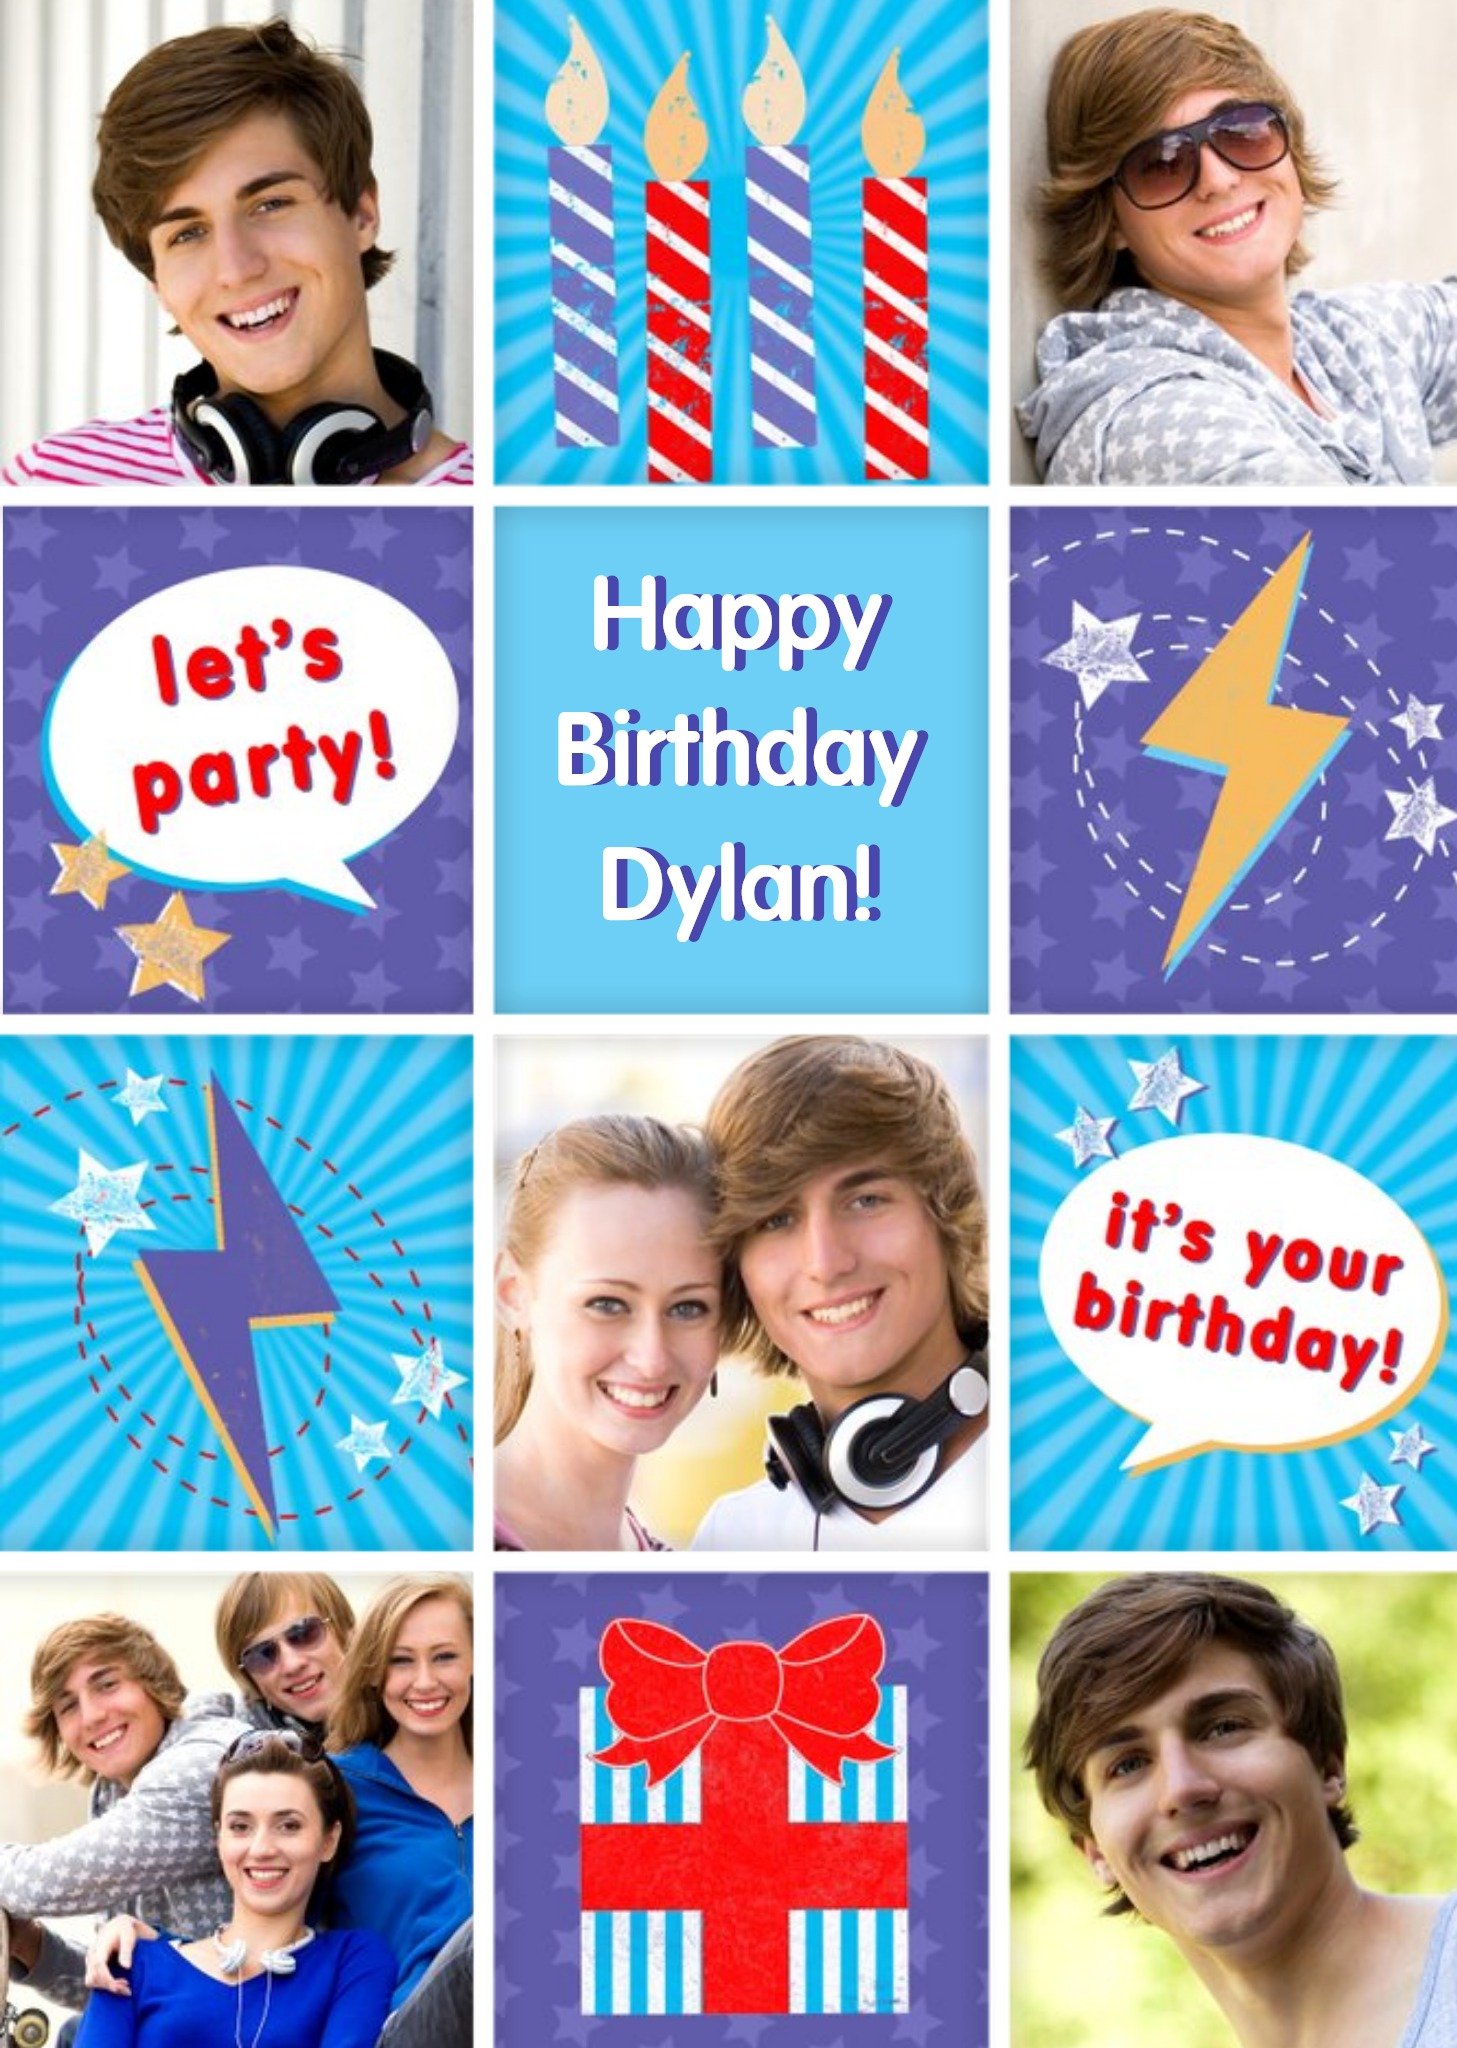 Moonpig Let's Party On Your Birthday Multi Photo Personalised Happy Birthday Card, Large